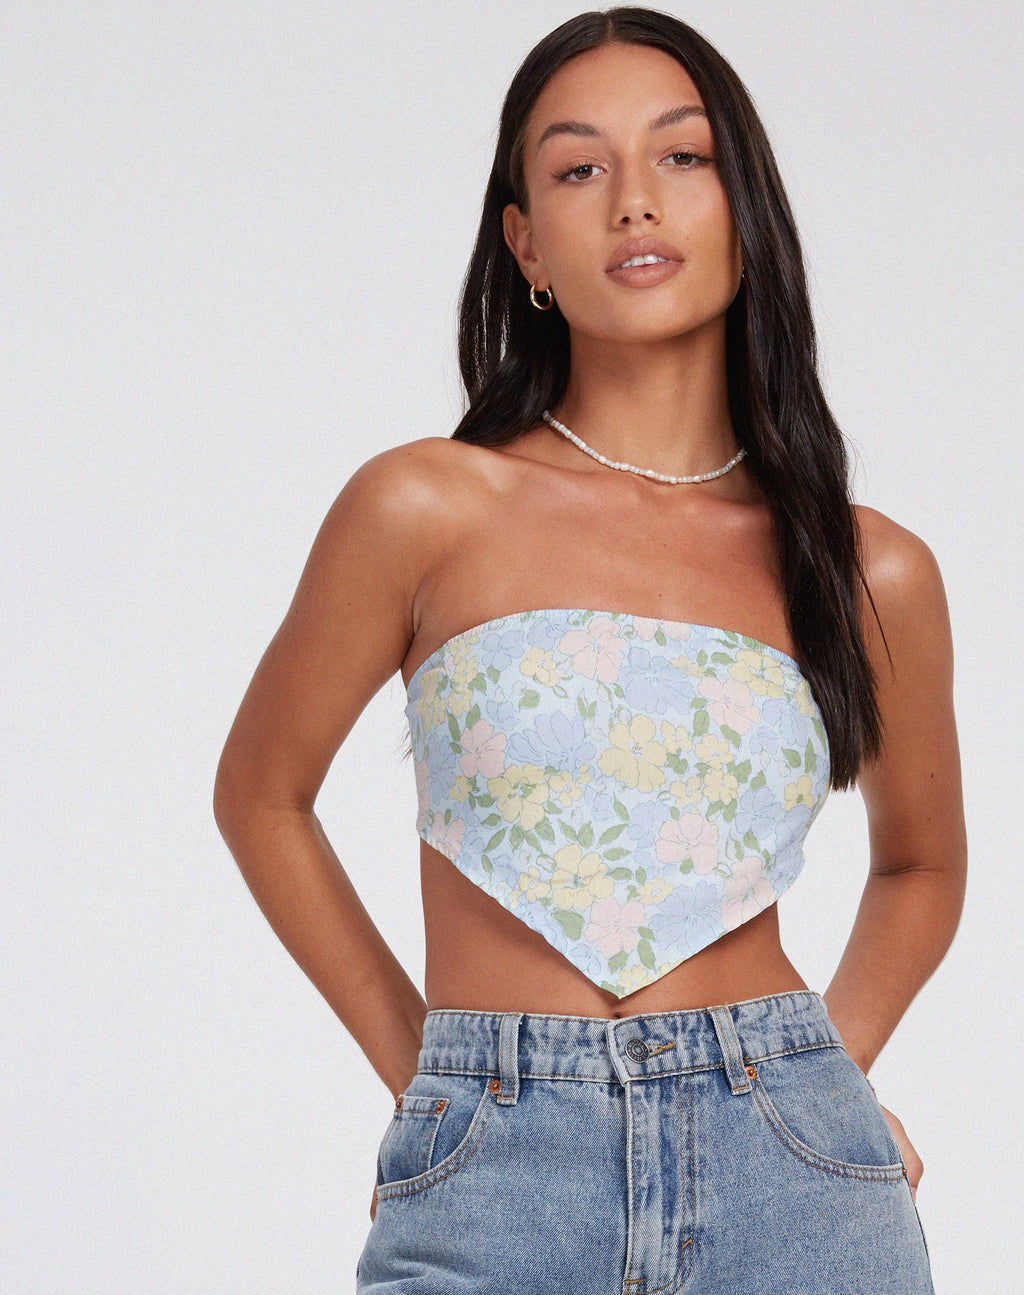 Nolda Crop Top in Washed Out Pastel Floral